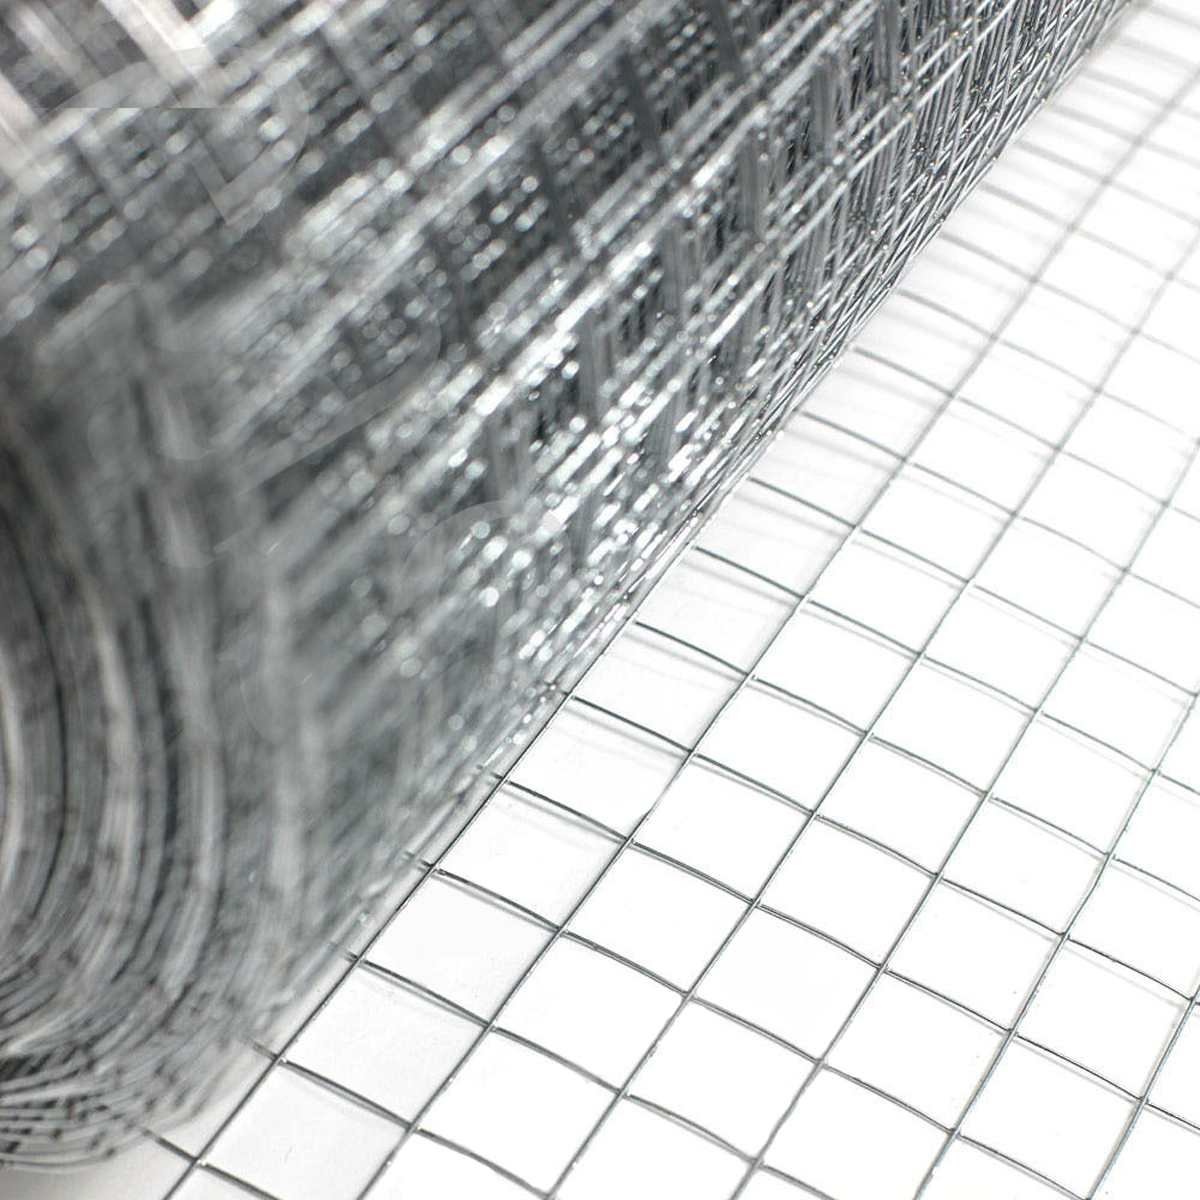 1x1 Inch Welded Galvanised Wire Mesh Fence Aviary Rabbit Hutch Chicken Coop Pet Wire Fence Mesh Fencing